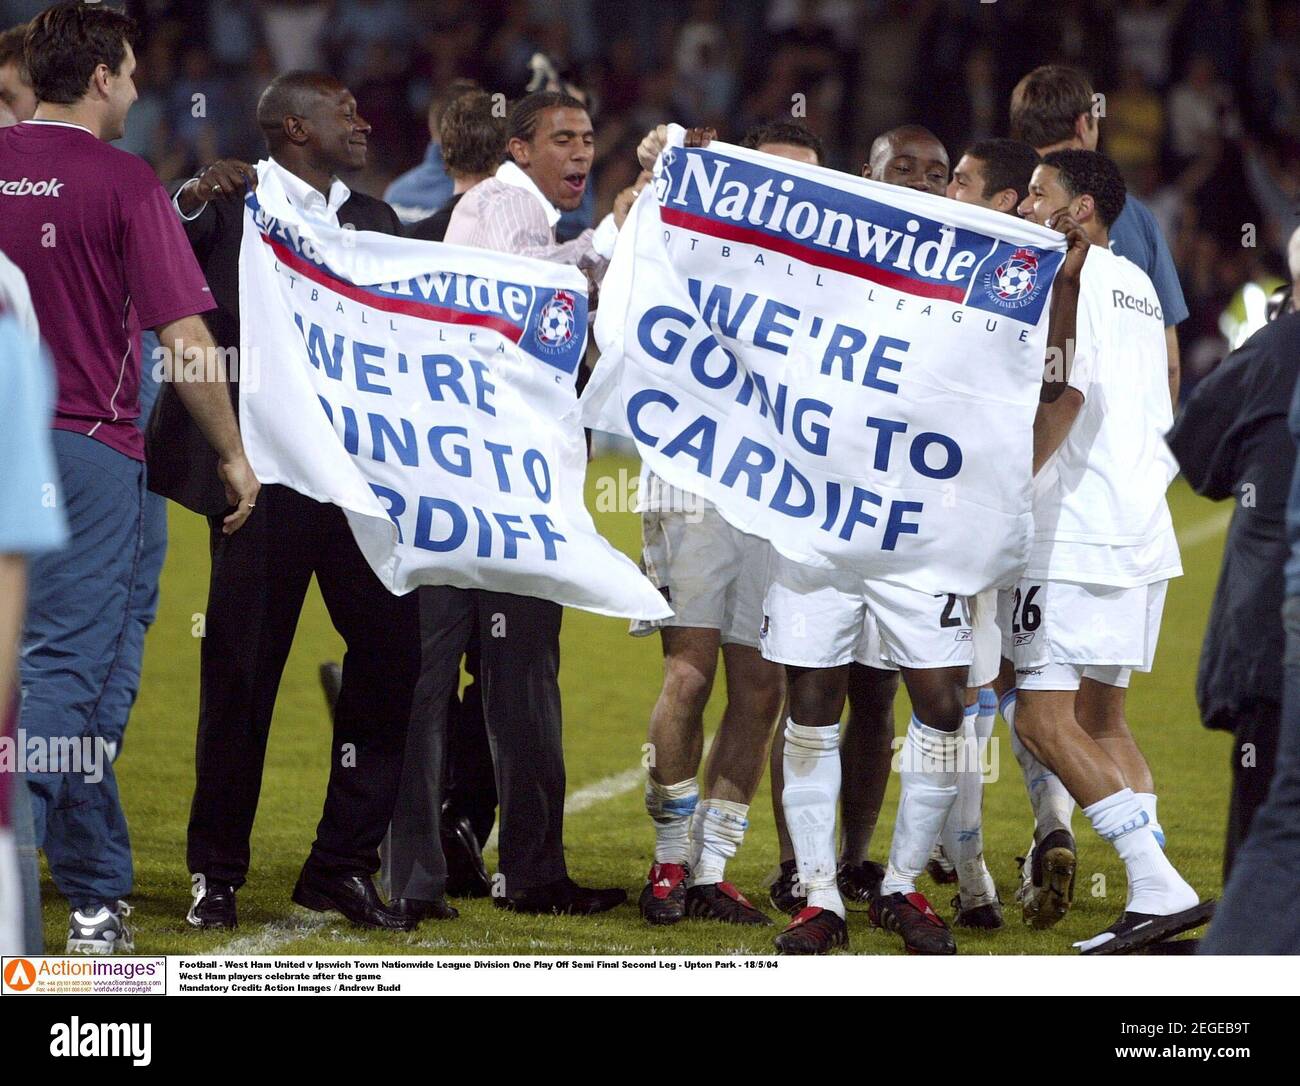 Calcio - West Ham United v Ipswich Town Nationwide League Division One Play Off semi Final Second leg - Upton Park - 18/5/04 West Ham Players Celebrate after the game Mandatory Credit: Action Images / Andrew Budd Foto Stock